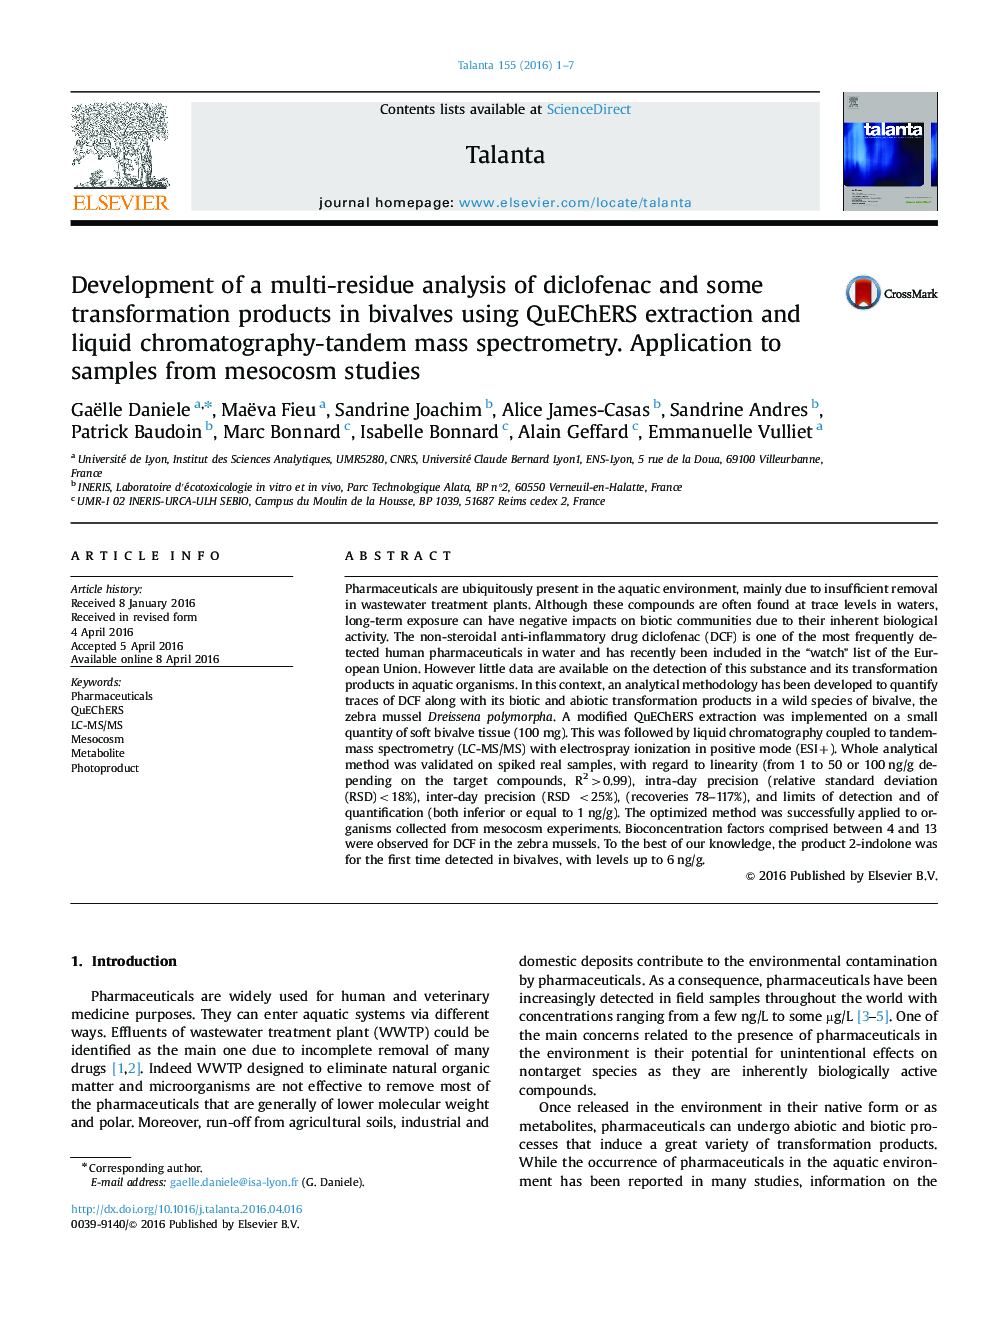 Development of a multi-residue analysis of diclofenac and some transformation products in bivalves using QuEChERS extraction and liquid chromatography-tandem mass spectrometry. Application to samples from mesocosm studies